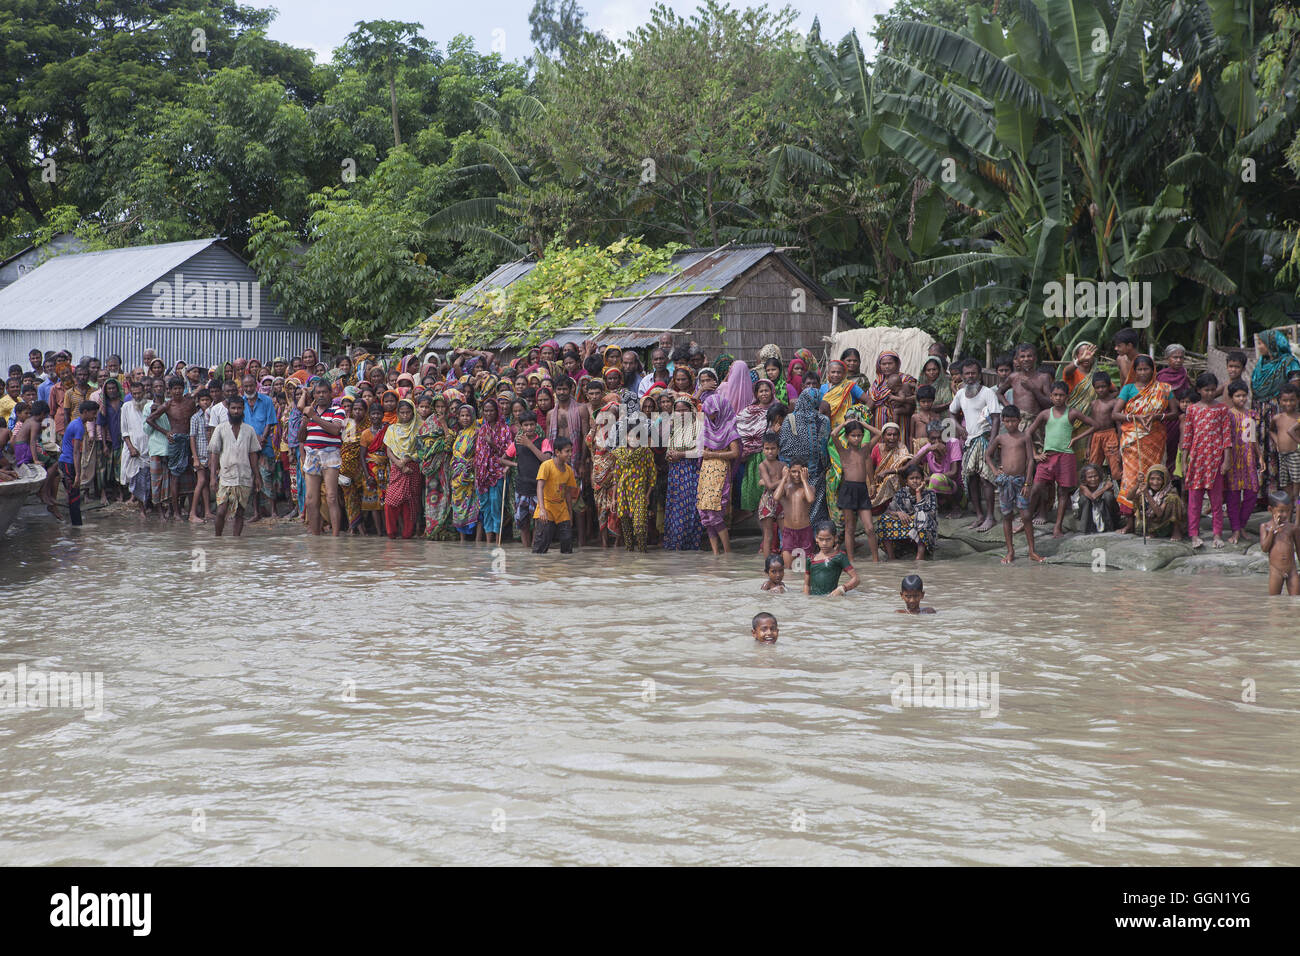 August 2, 2016 - Jamalpur, Mymensingh, Bangladesh - Villagers are waiting for a relief boat in Islampur, Jamalpur. According to the Bangladesh Disaster Management Bureau around 1.5 million people have been affected by this year flood. Rivers in the north started to rise in early July and by the 20th of July nearly all of them started to flow over the danger level. It caused floods in 6 districts, namely, Lalmonirhat, Kurigram, Gaibandha, Jamalpur, Sirajganj and Sunamganj initially and inundated crop fields and dwelling areas, washed away standing crops, houses and householdâ€™s assets, livesto Stock Photo